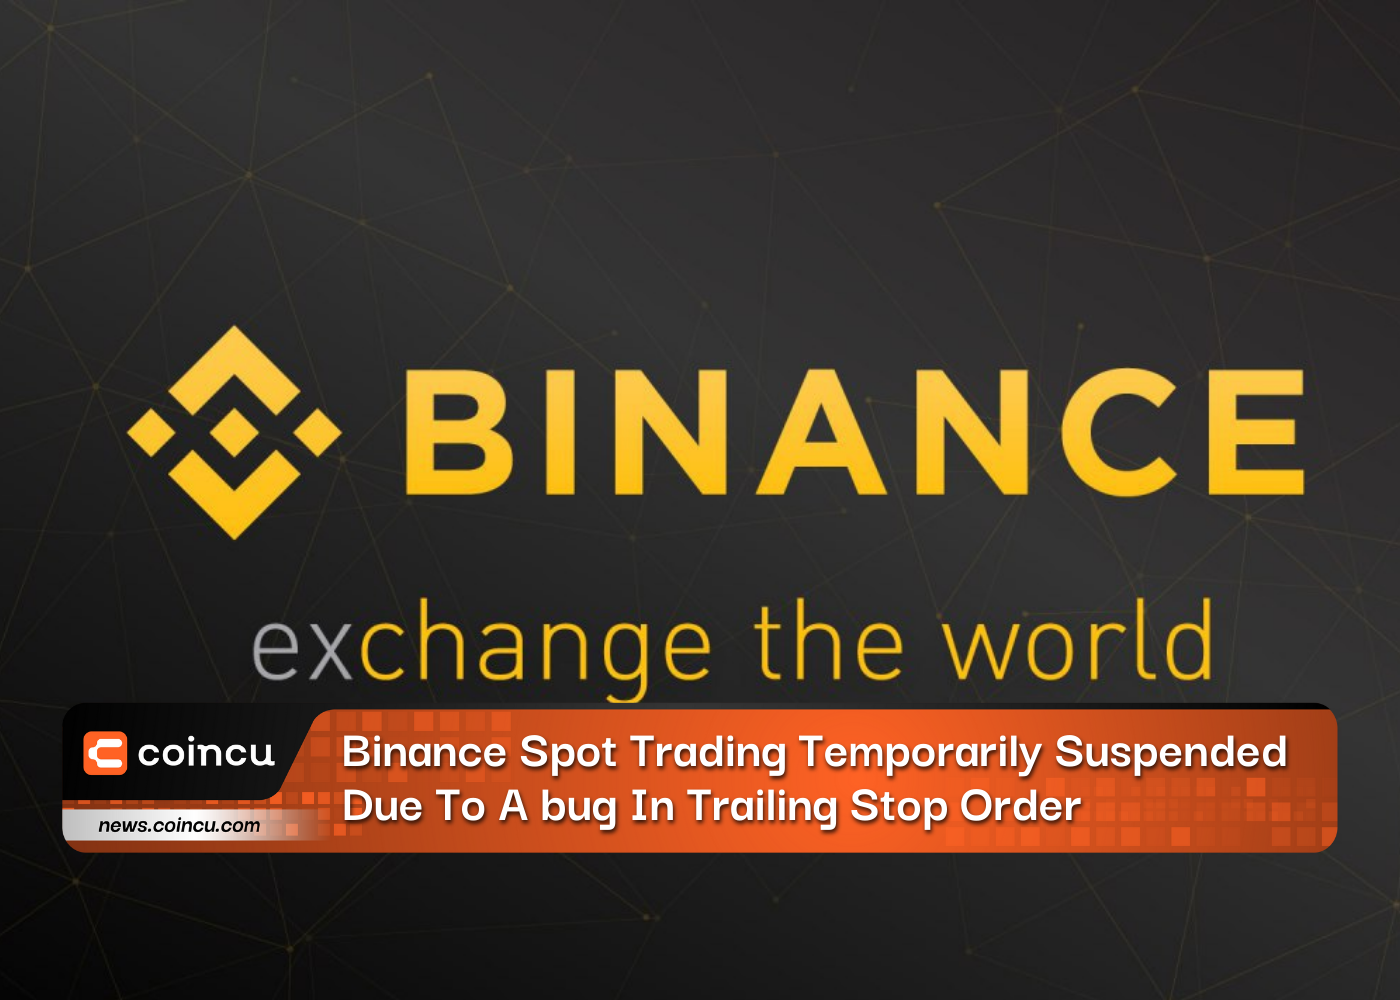 Binance Spot Trading Temporarily Suspended Due To A bug In Trailing Stop Order